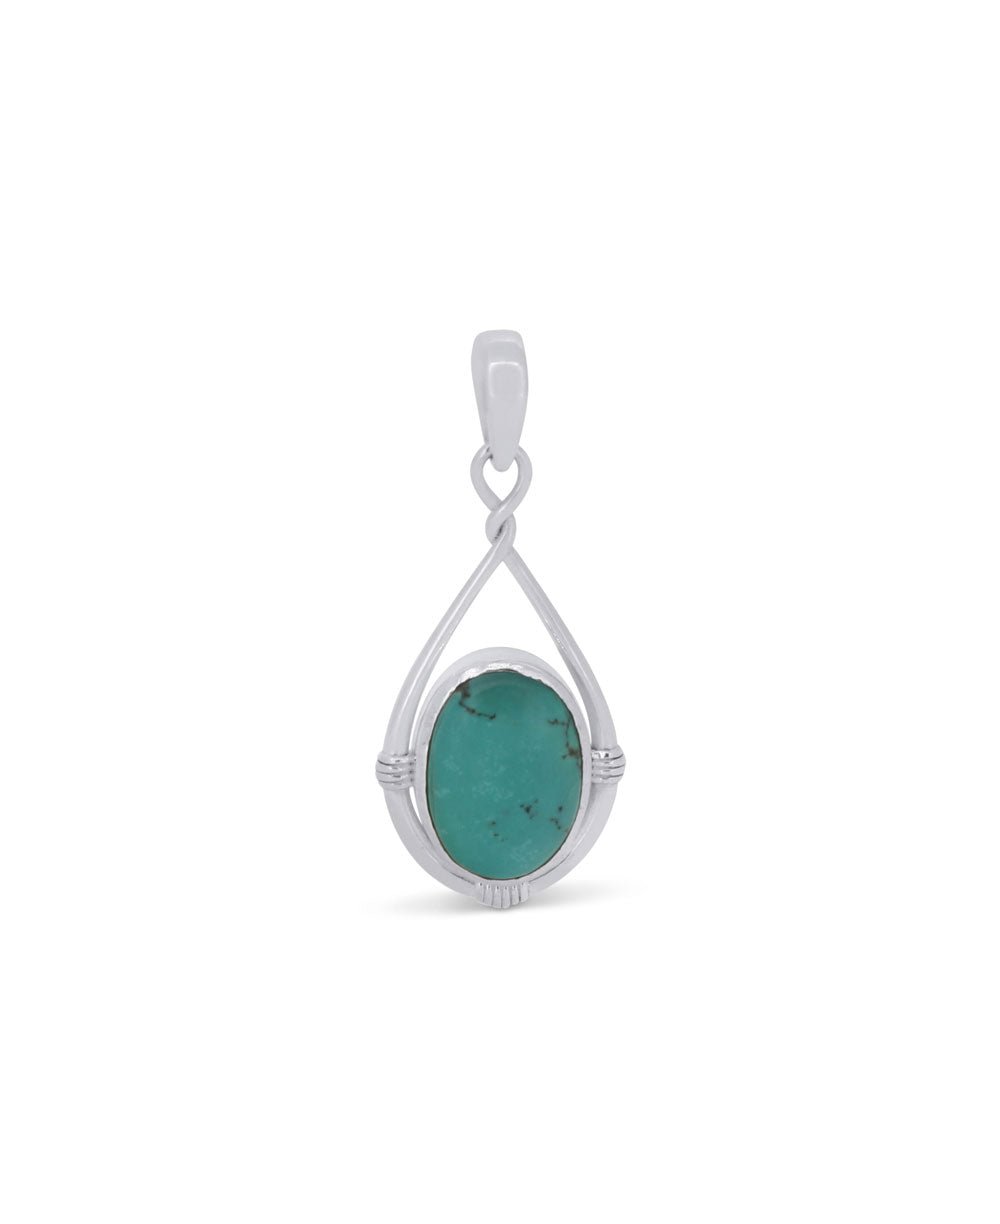 Sterling Silver Pendant with Tibetan Turquoise - Charms & Pendants